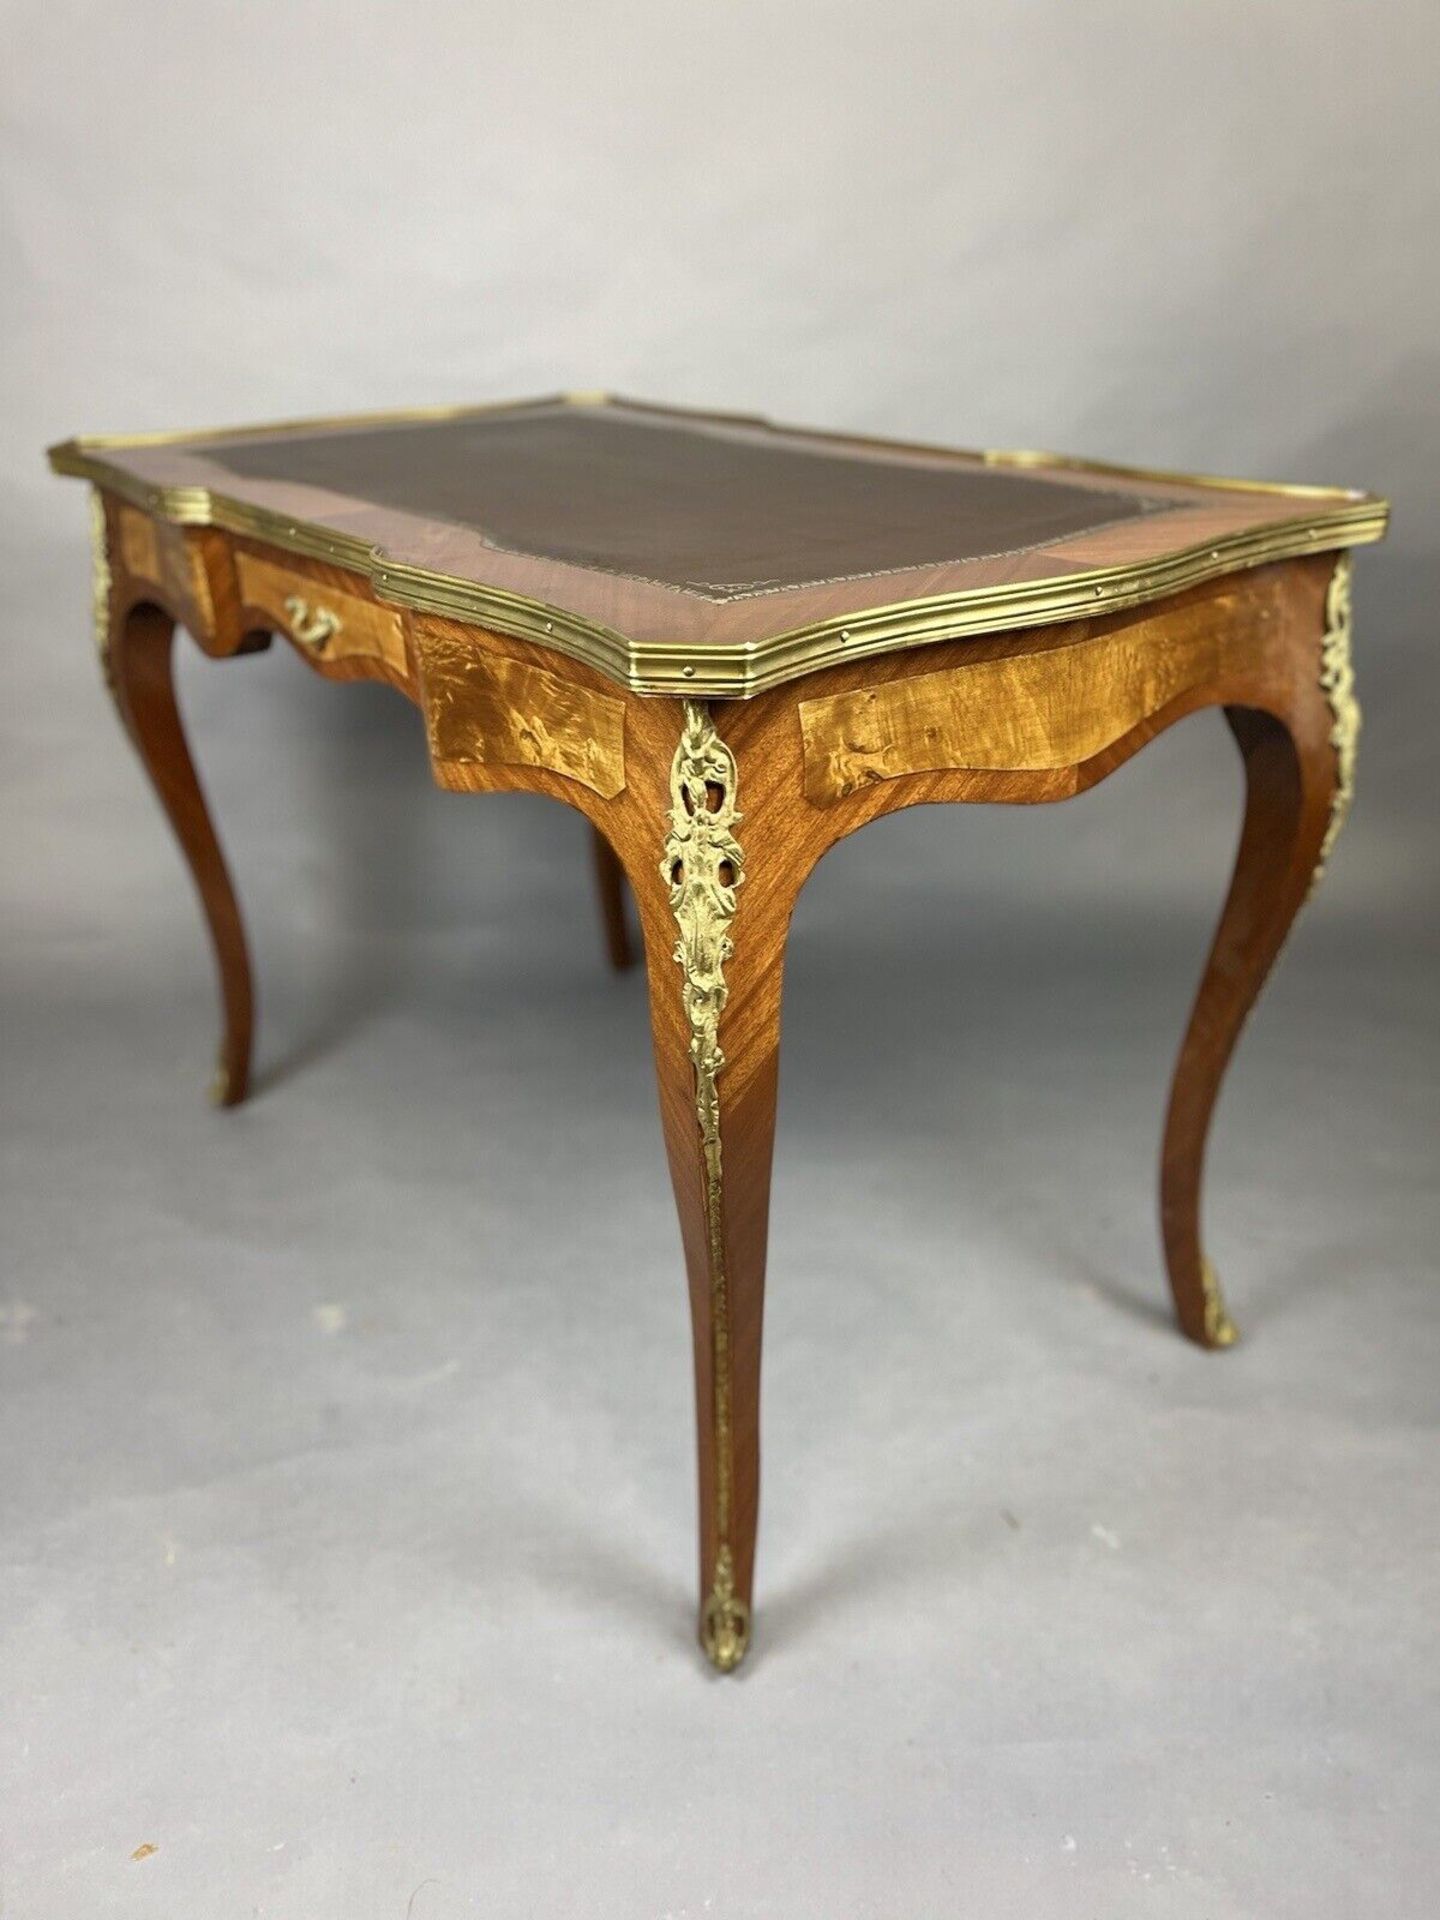 French Louis XV Style Kingwood Leather Inlay Bureau Plat Desk With Gilt Bronze Ormolu The Shaped Top - Image 5 of 7